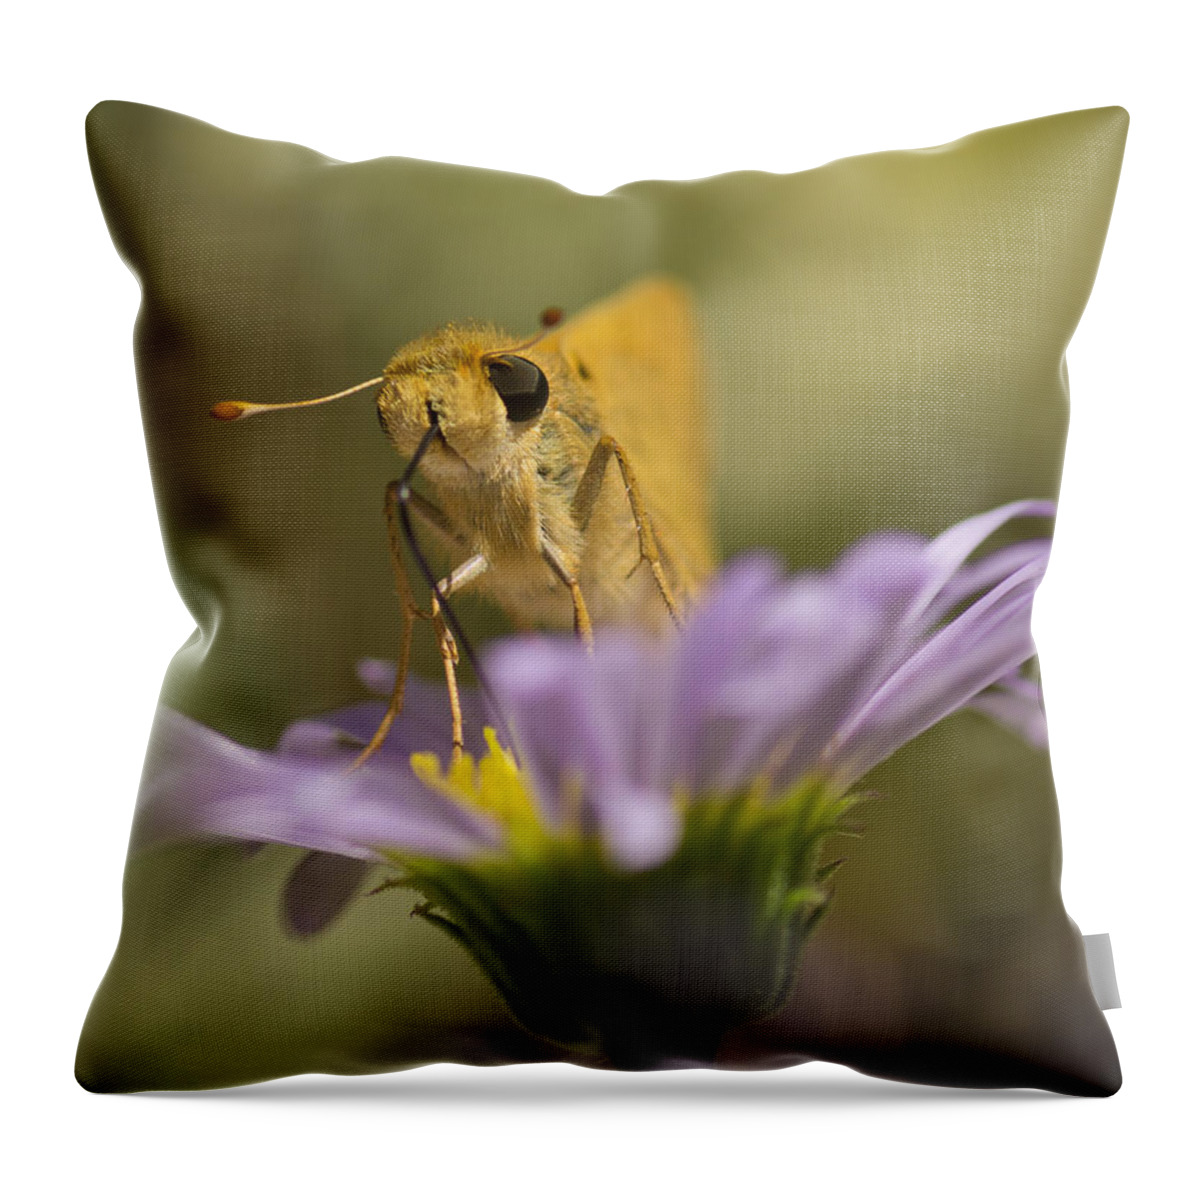 Butterfly Throw Pillow featuring the photograph Summer Skipper by Priya Ghose